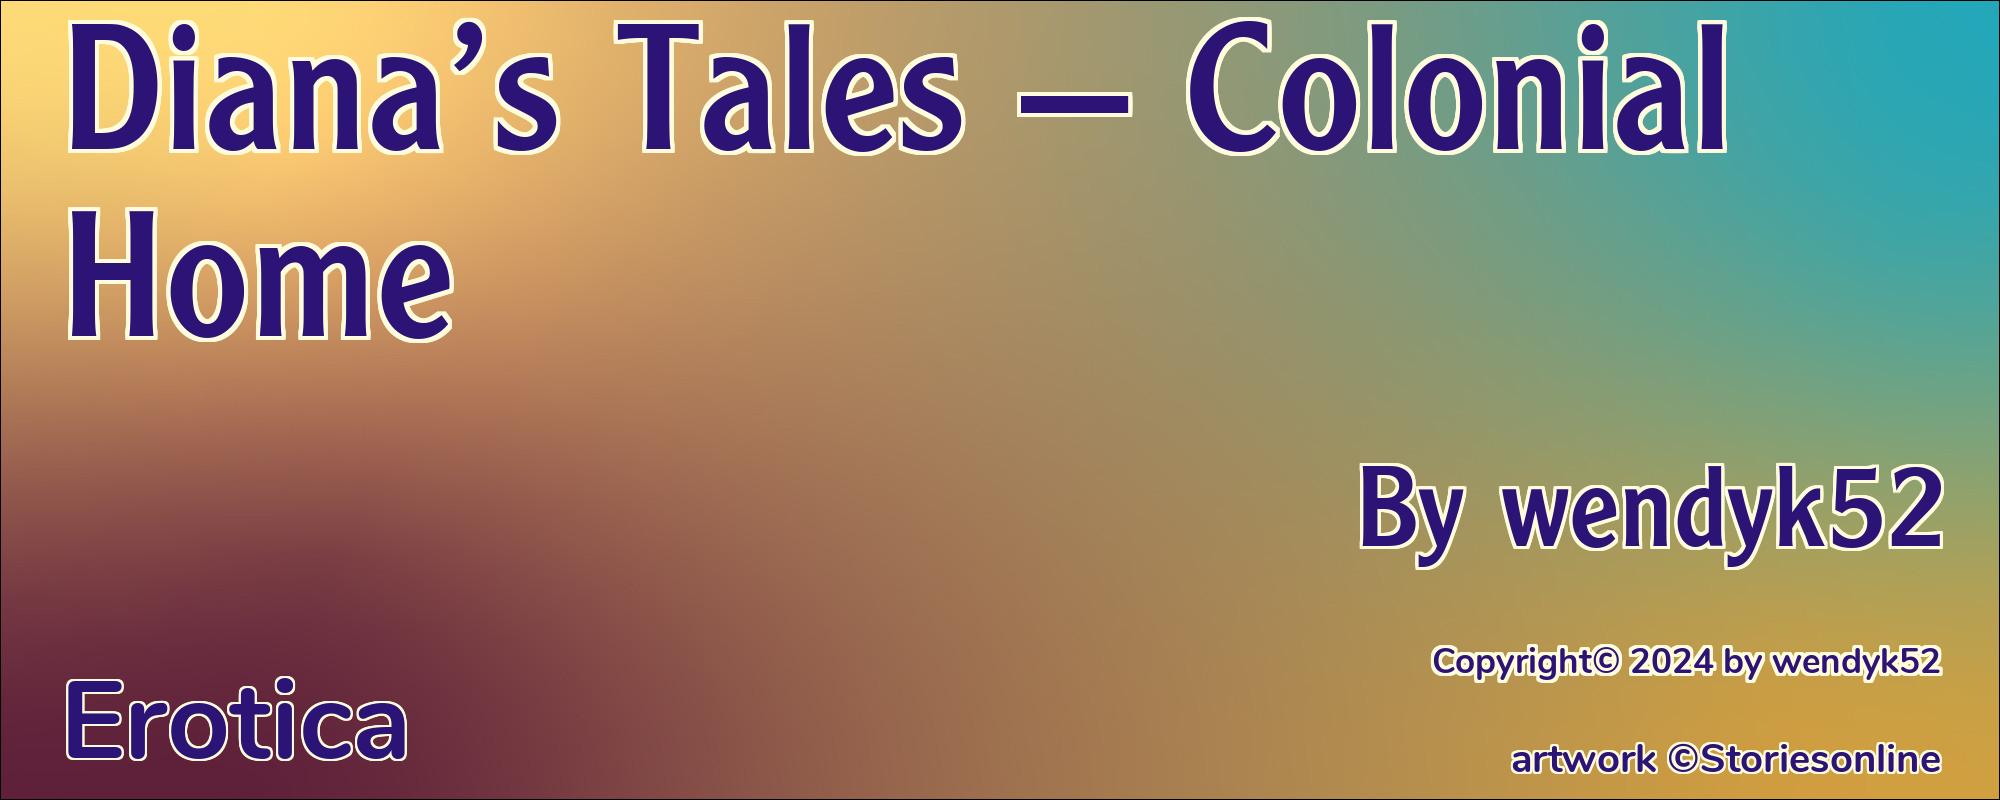 Diana’s Tales — Colonial Home - Cover